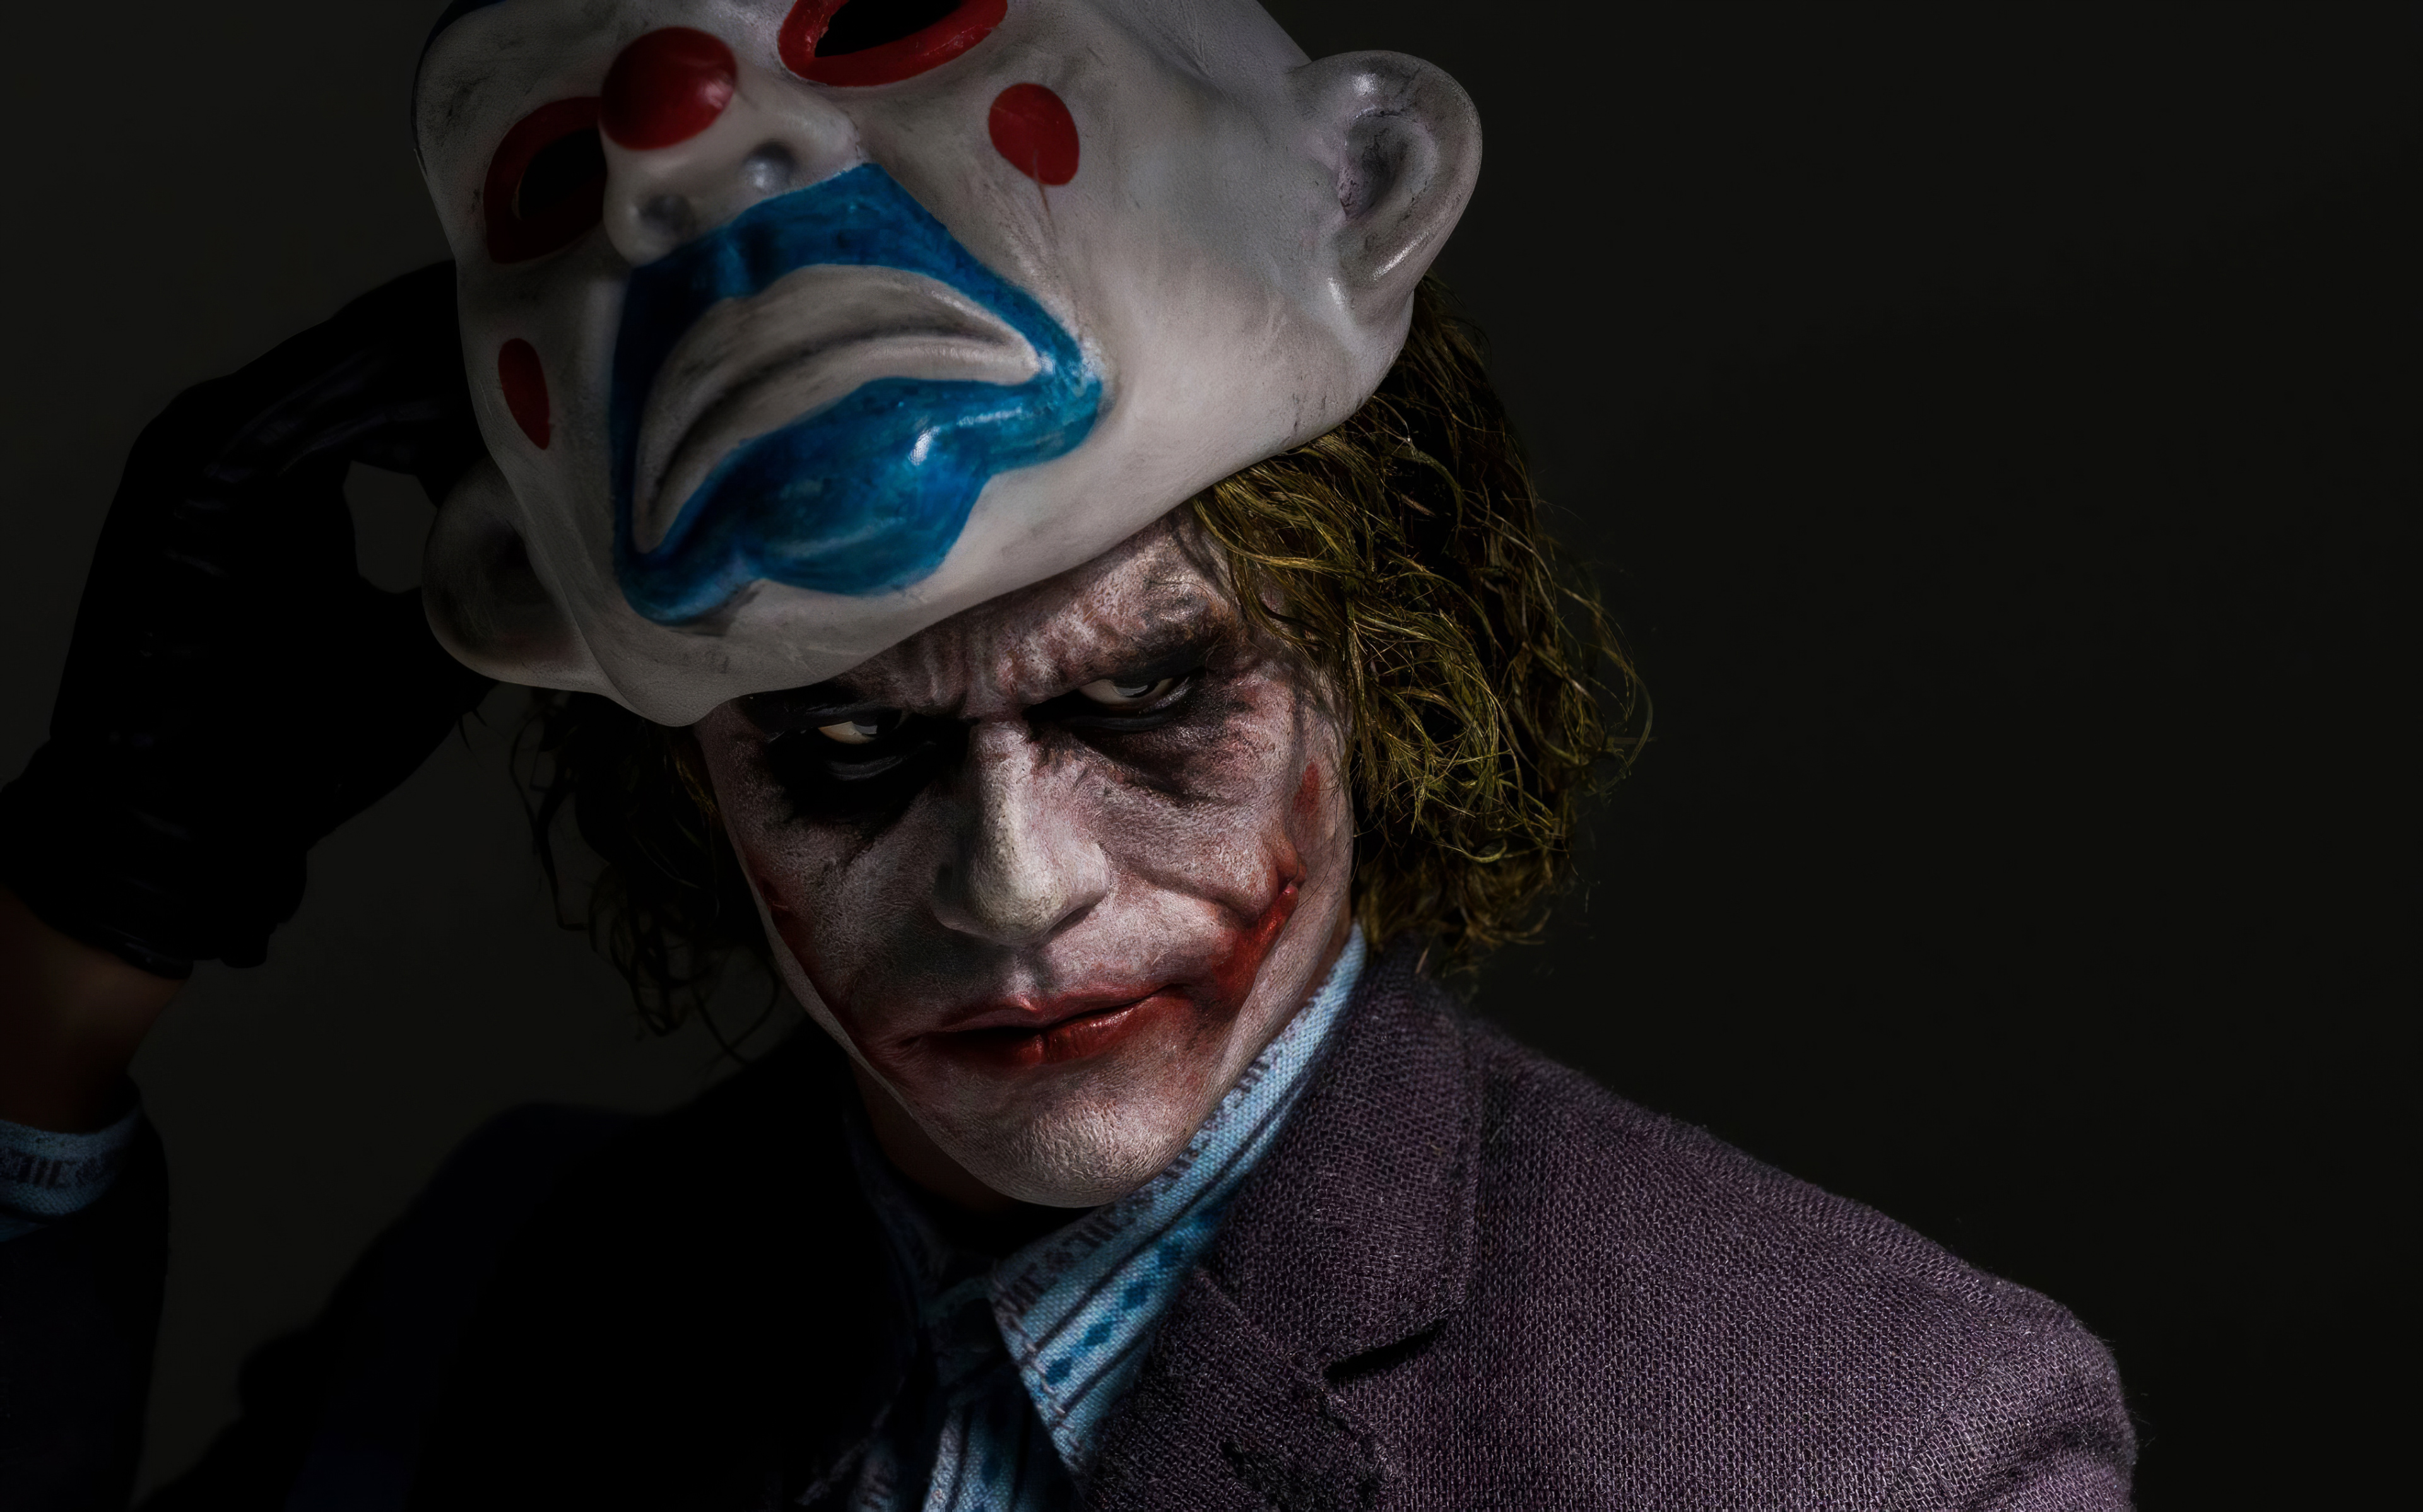 Download 2560x1080 Joker Mask 4k 2560x1080 Resolution Hd 4k Wallpapers Images Backgrounds Photos And Pictures